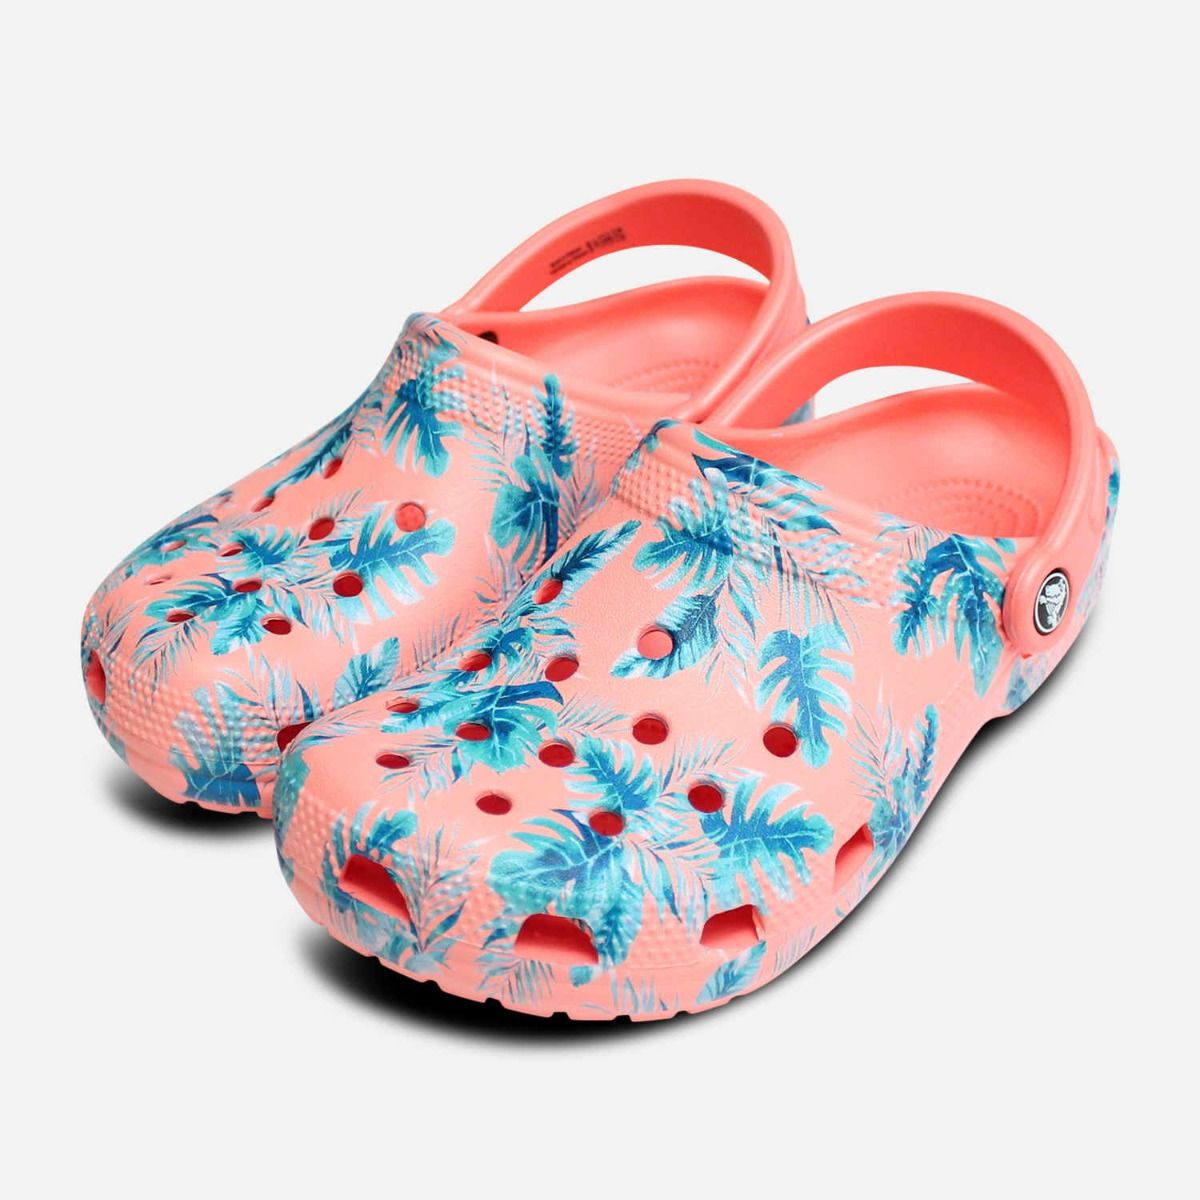 Tropical Pink Classic Clogs by Crocs Shoes